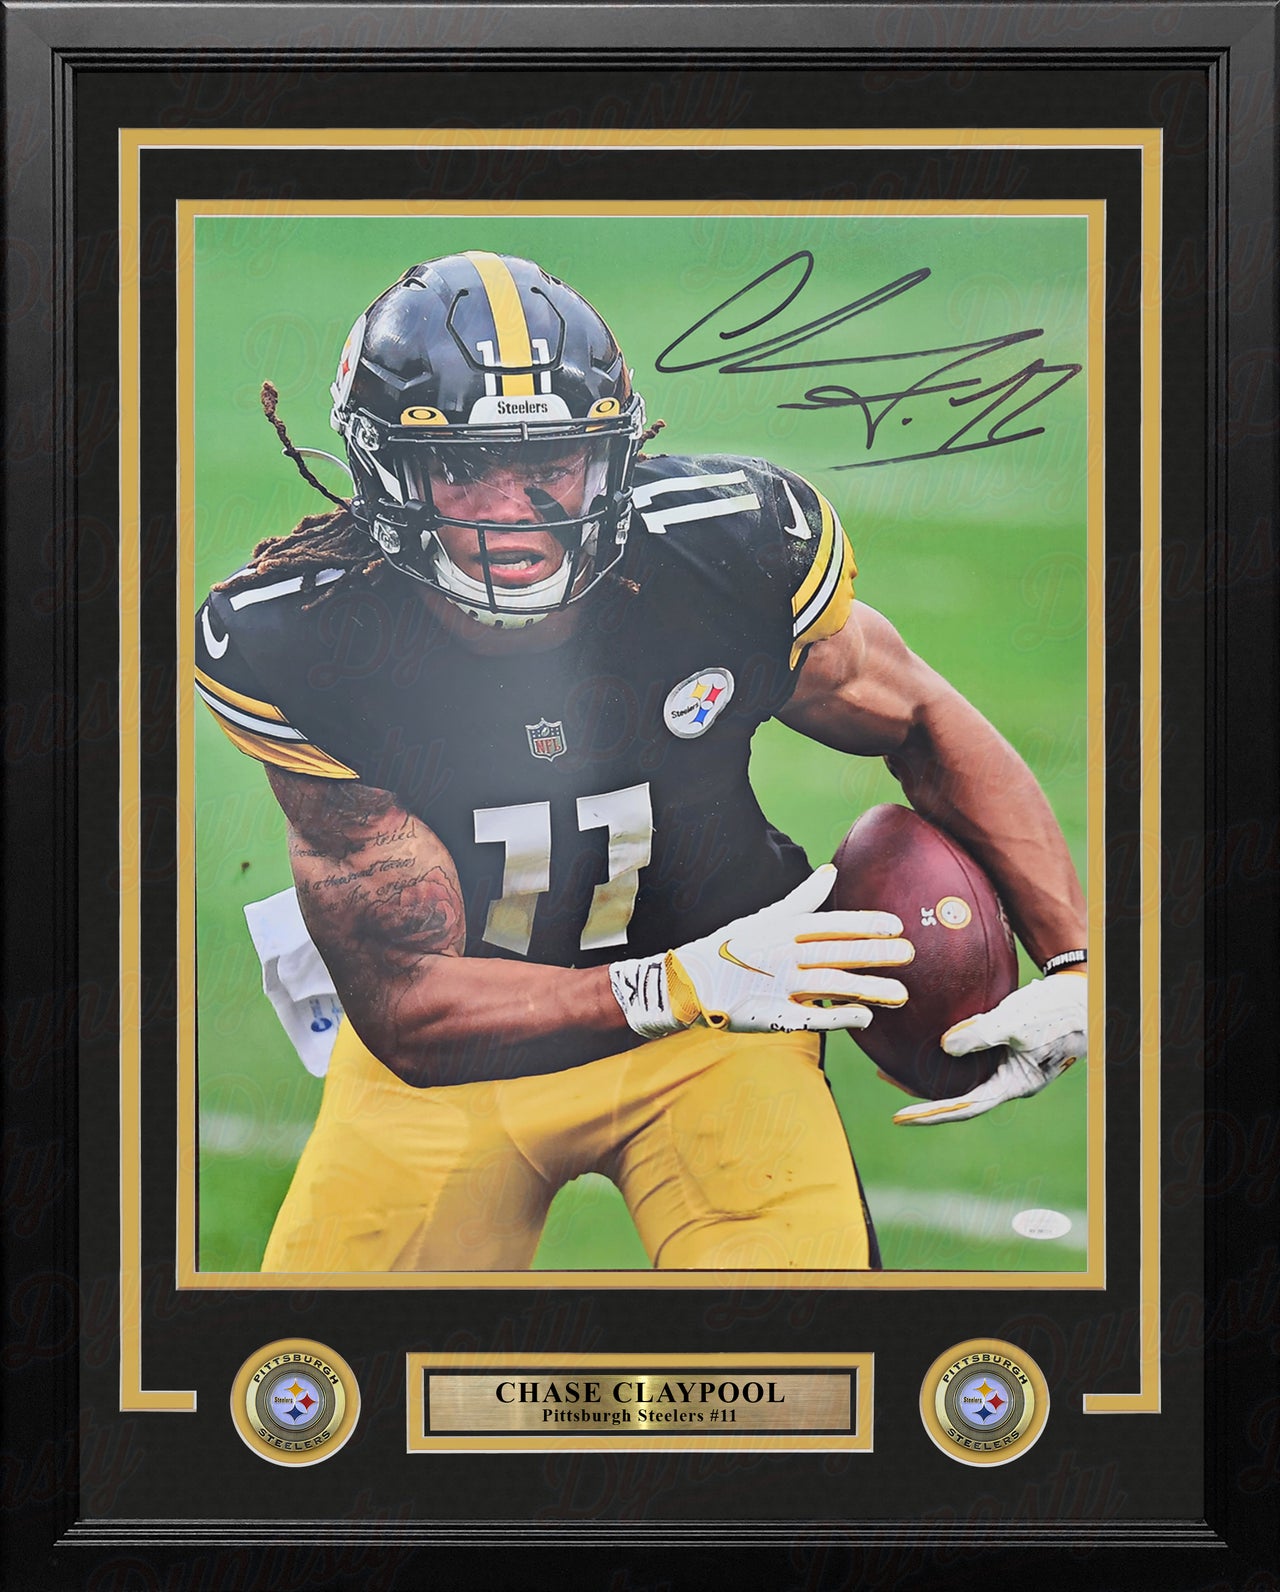 Chase Claypool Close-Up Action Pittsburgh Steelers Autographed 16" x 20" Framed Football Photo - Dynasty Sports & Framing 